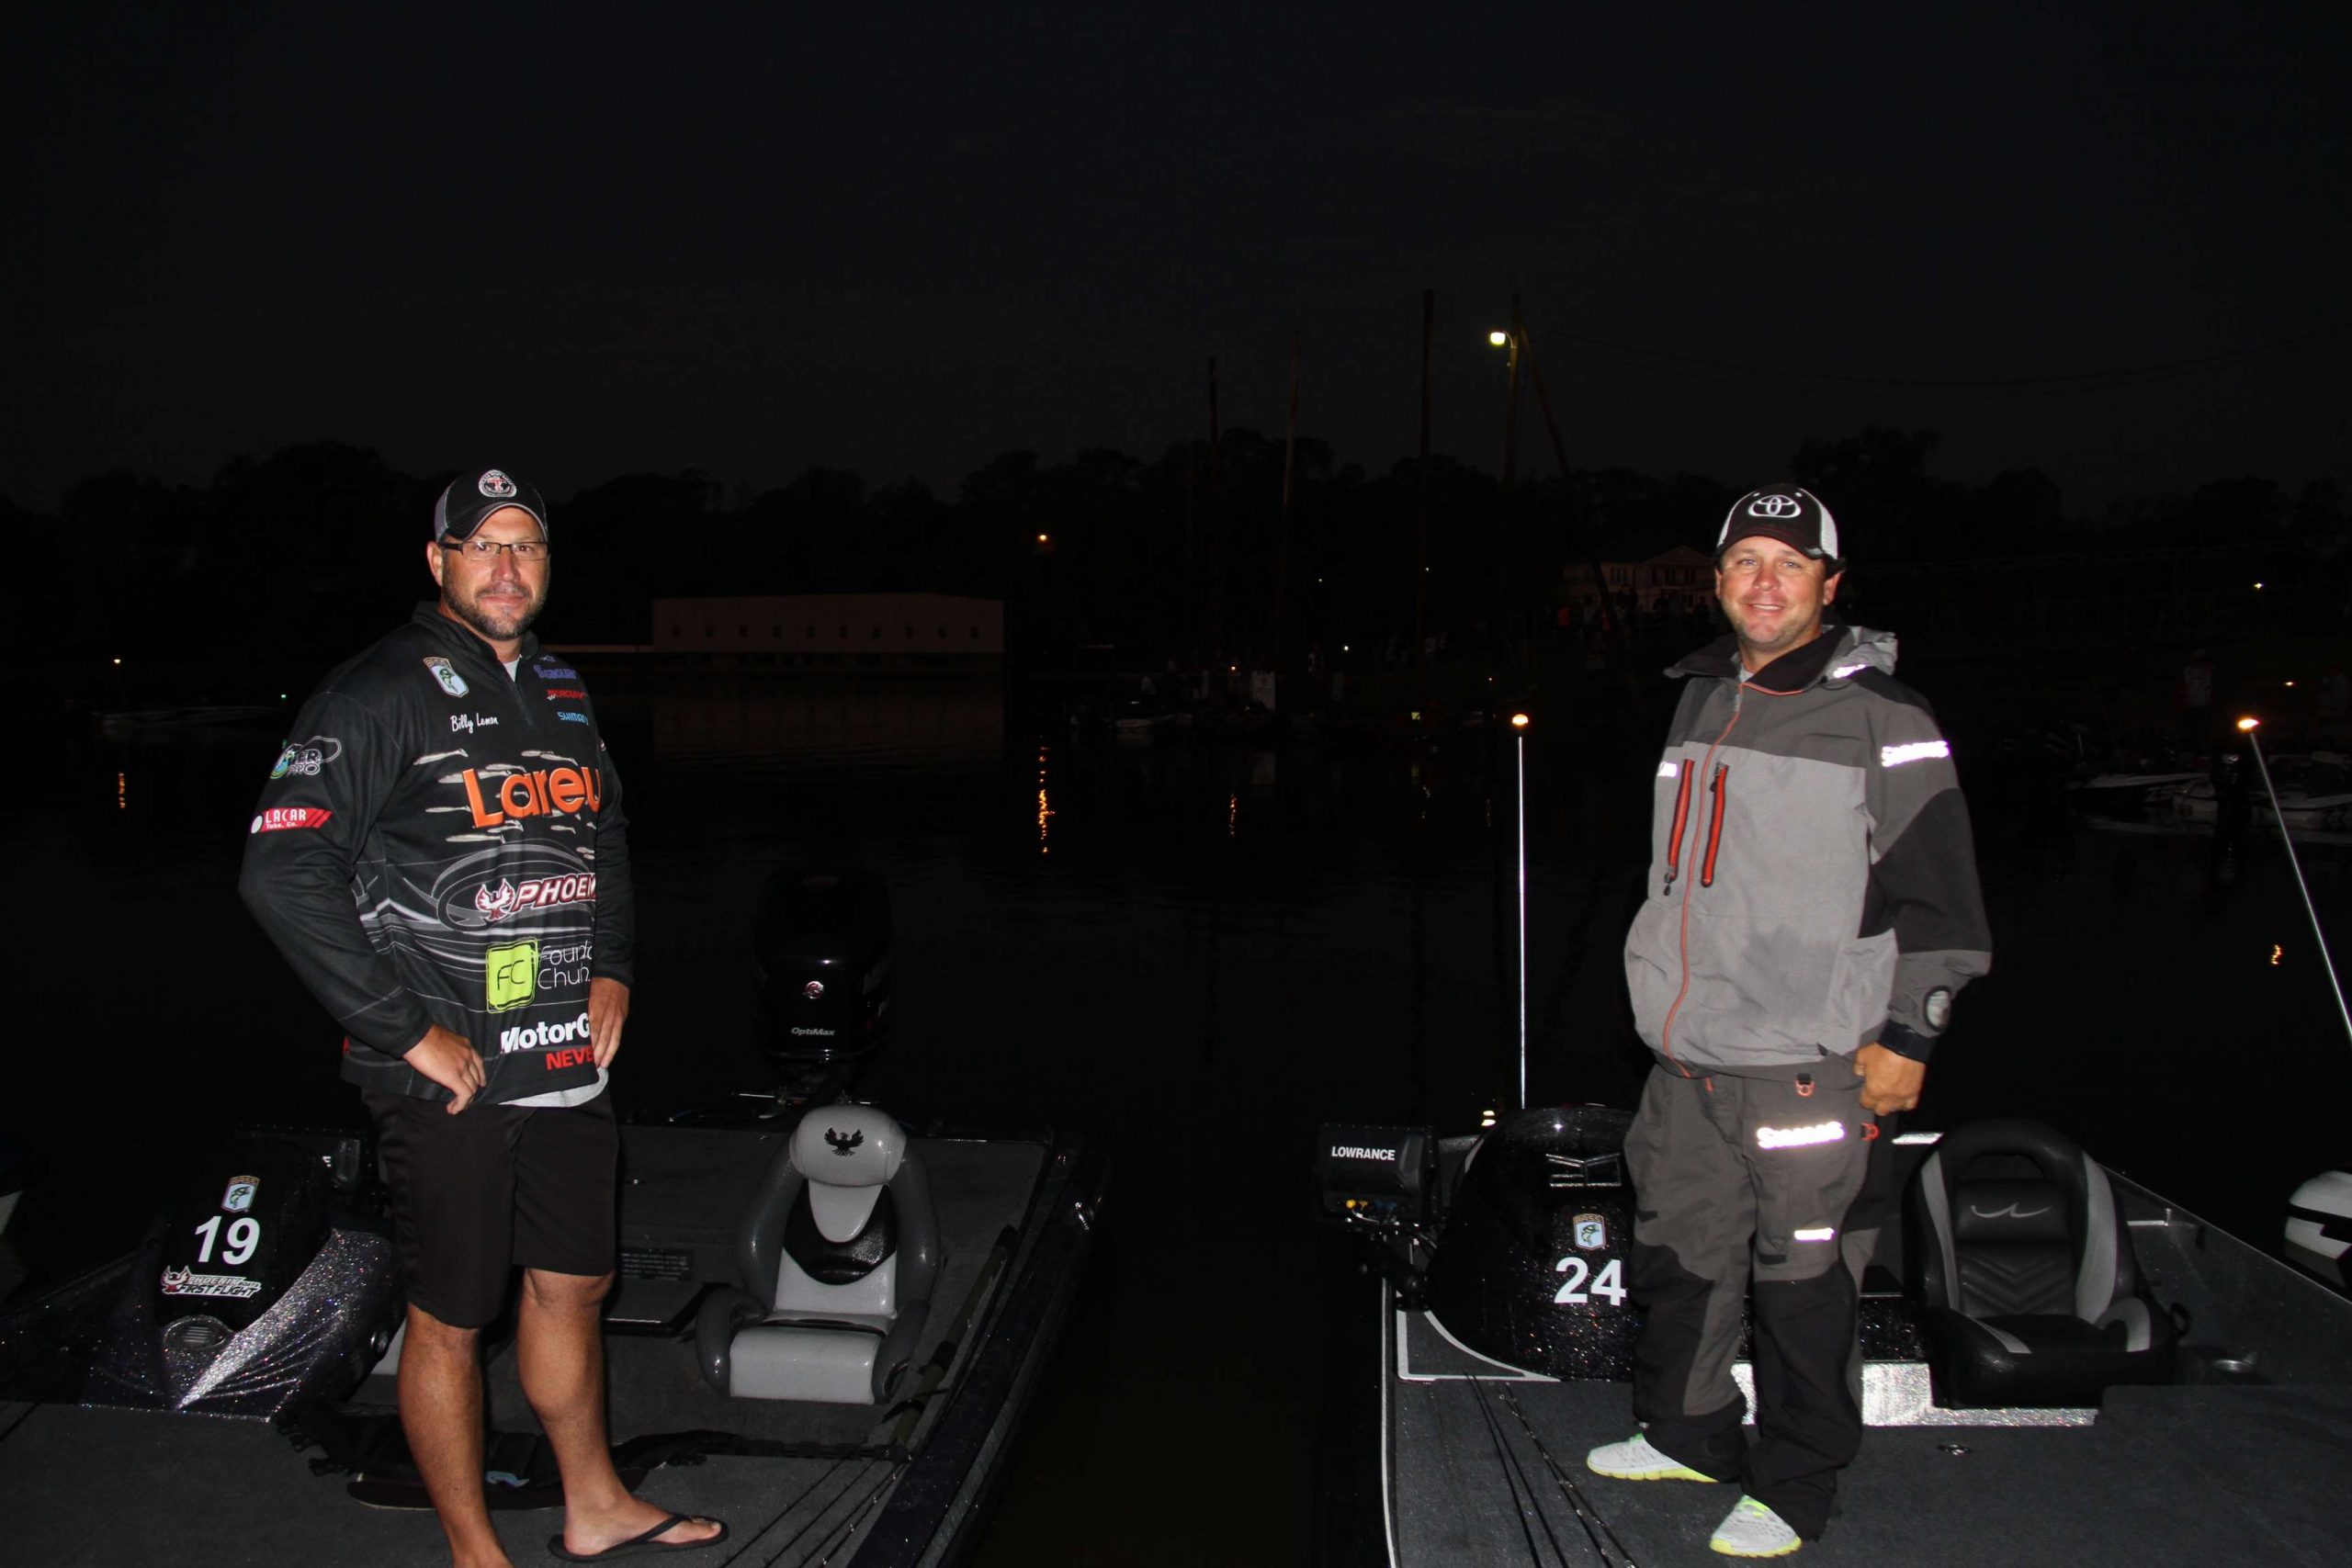 Billy Lemon of Oklahoma and Kyle Glasgow of Alabama are ready to find some bass today.